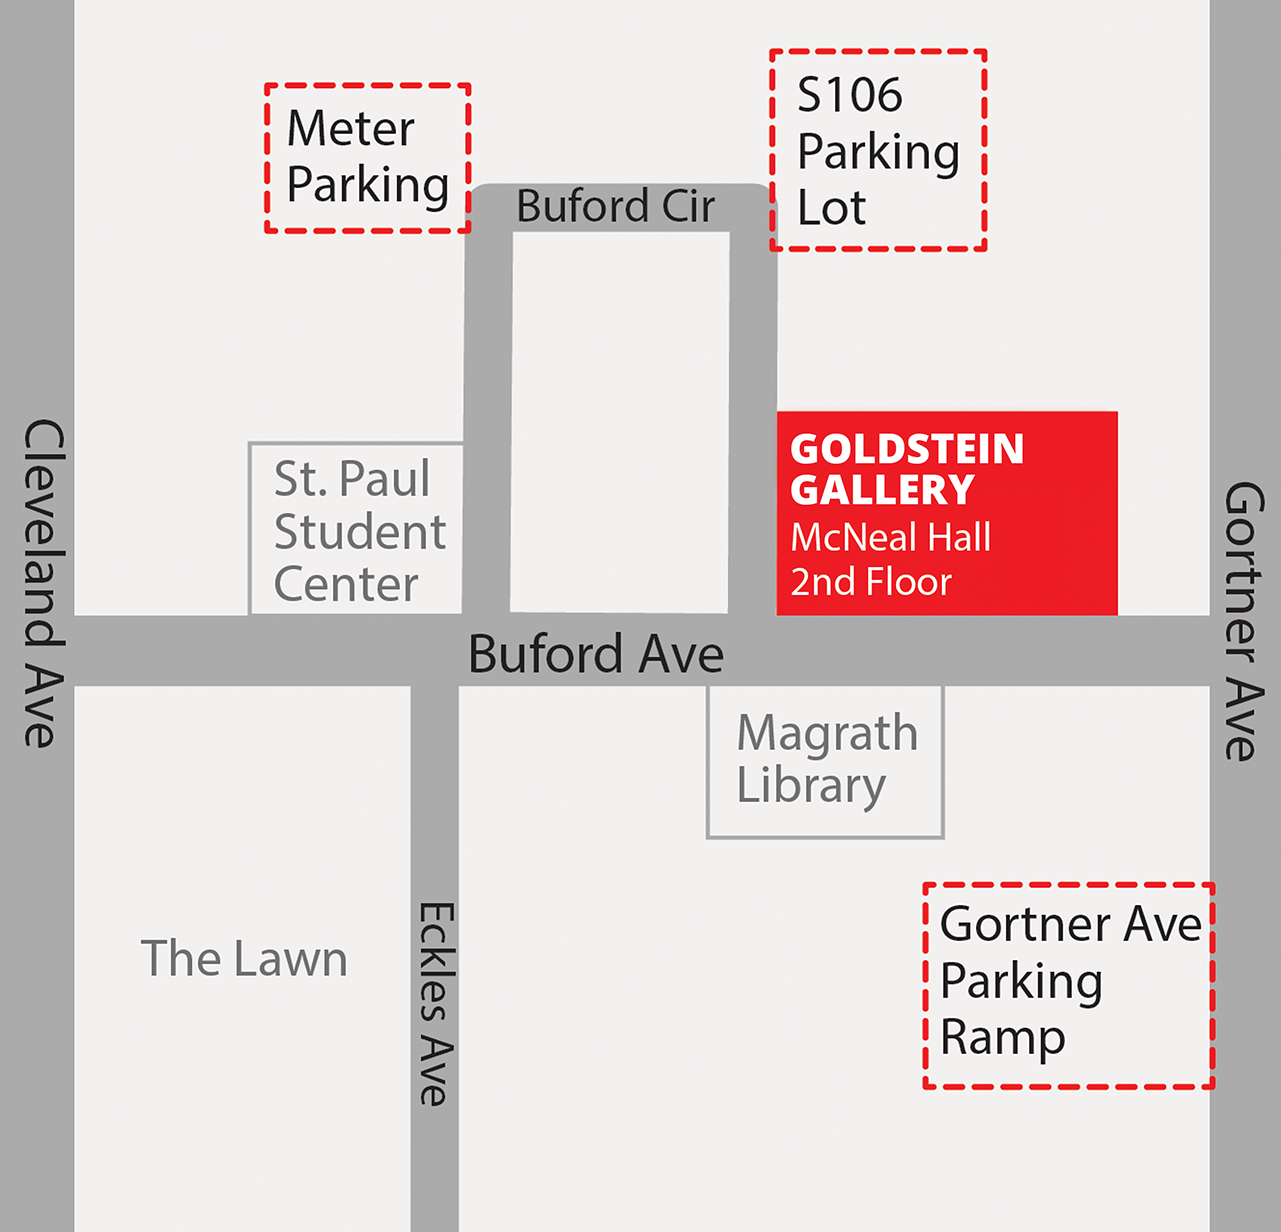 Map of Goldstein Gallery on Saint Paul campus.